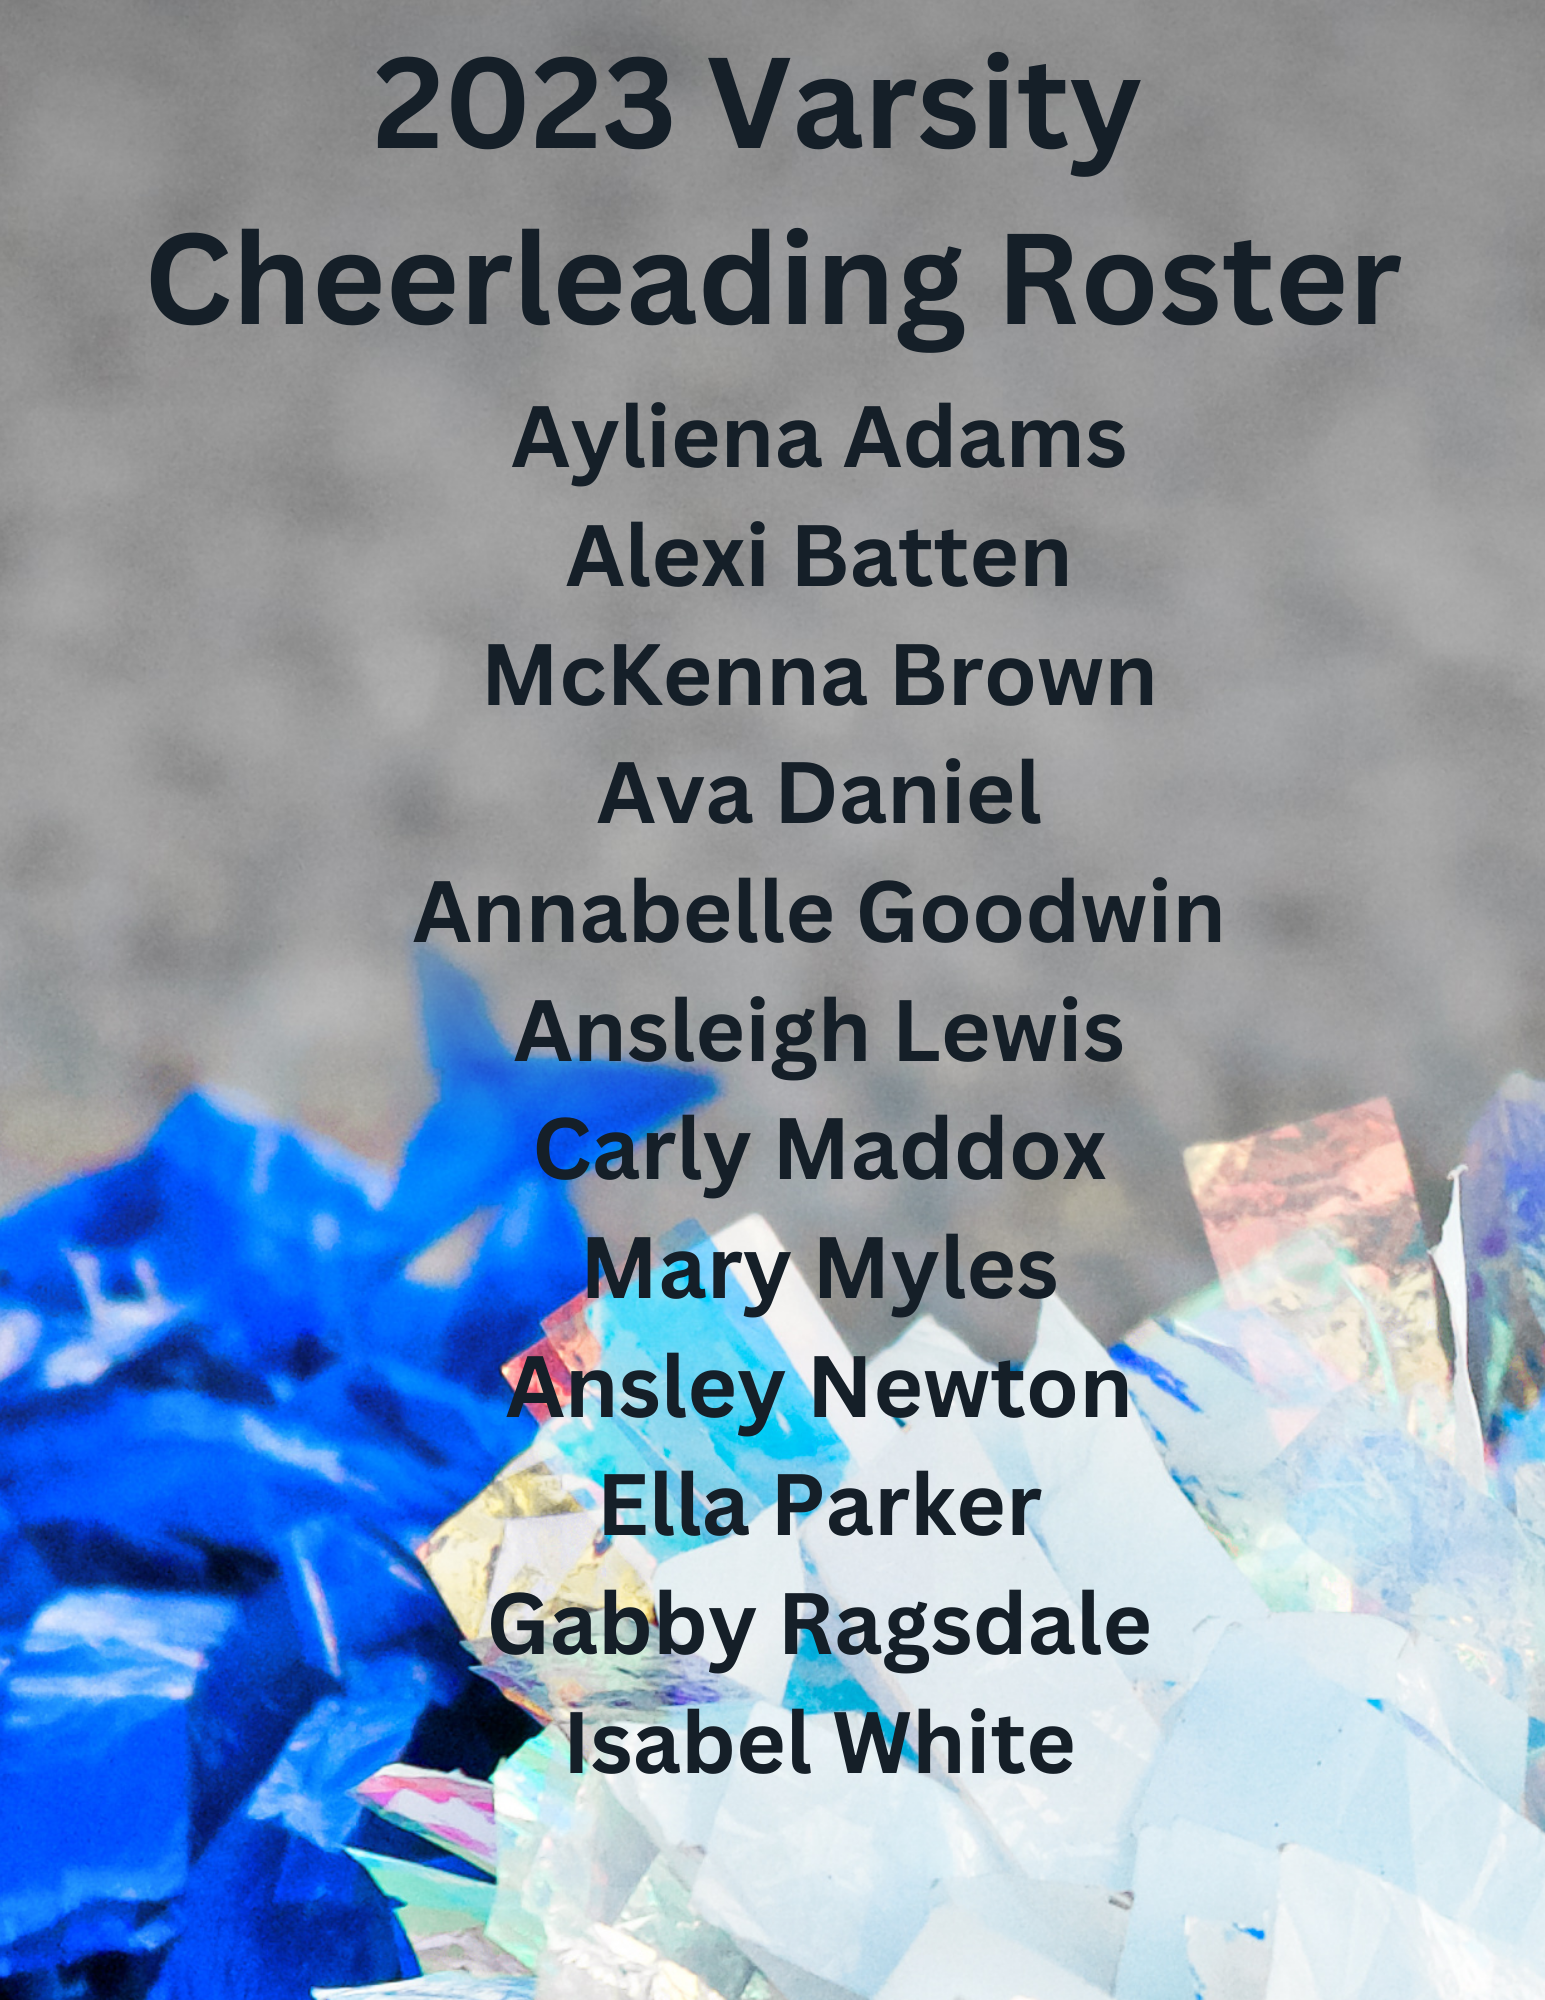 a poster for the 2023 varsity cheerleading roster